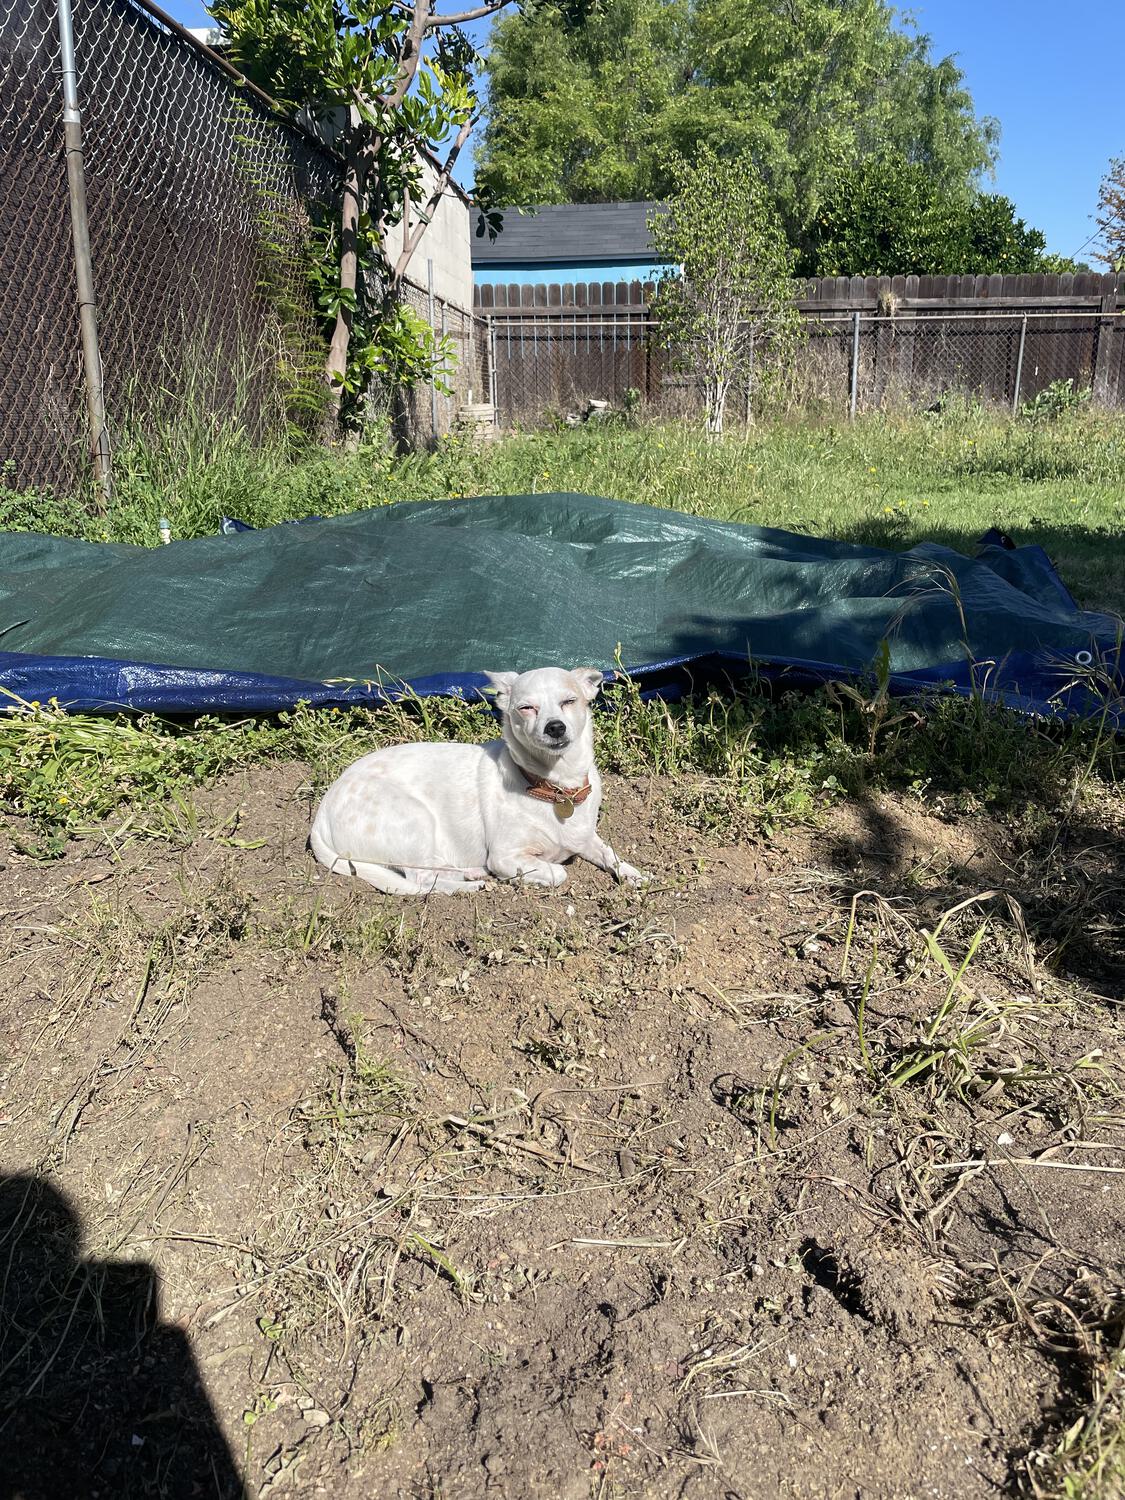 Travis the dog, sunbathing in a patch of dirt